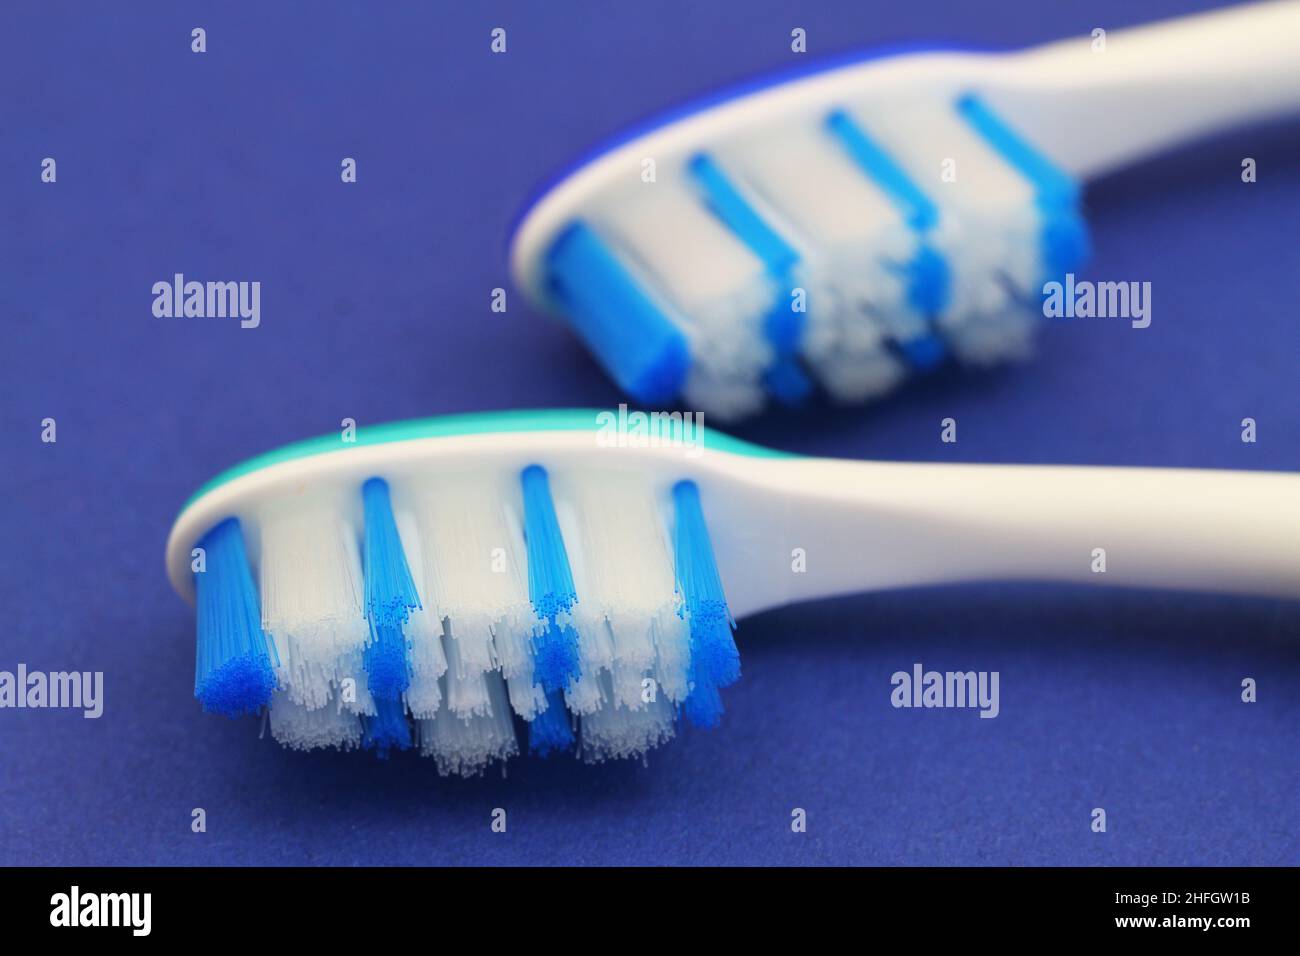 Close up of blue and white toothbrushes on blue background Stock Photo